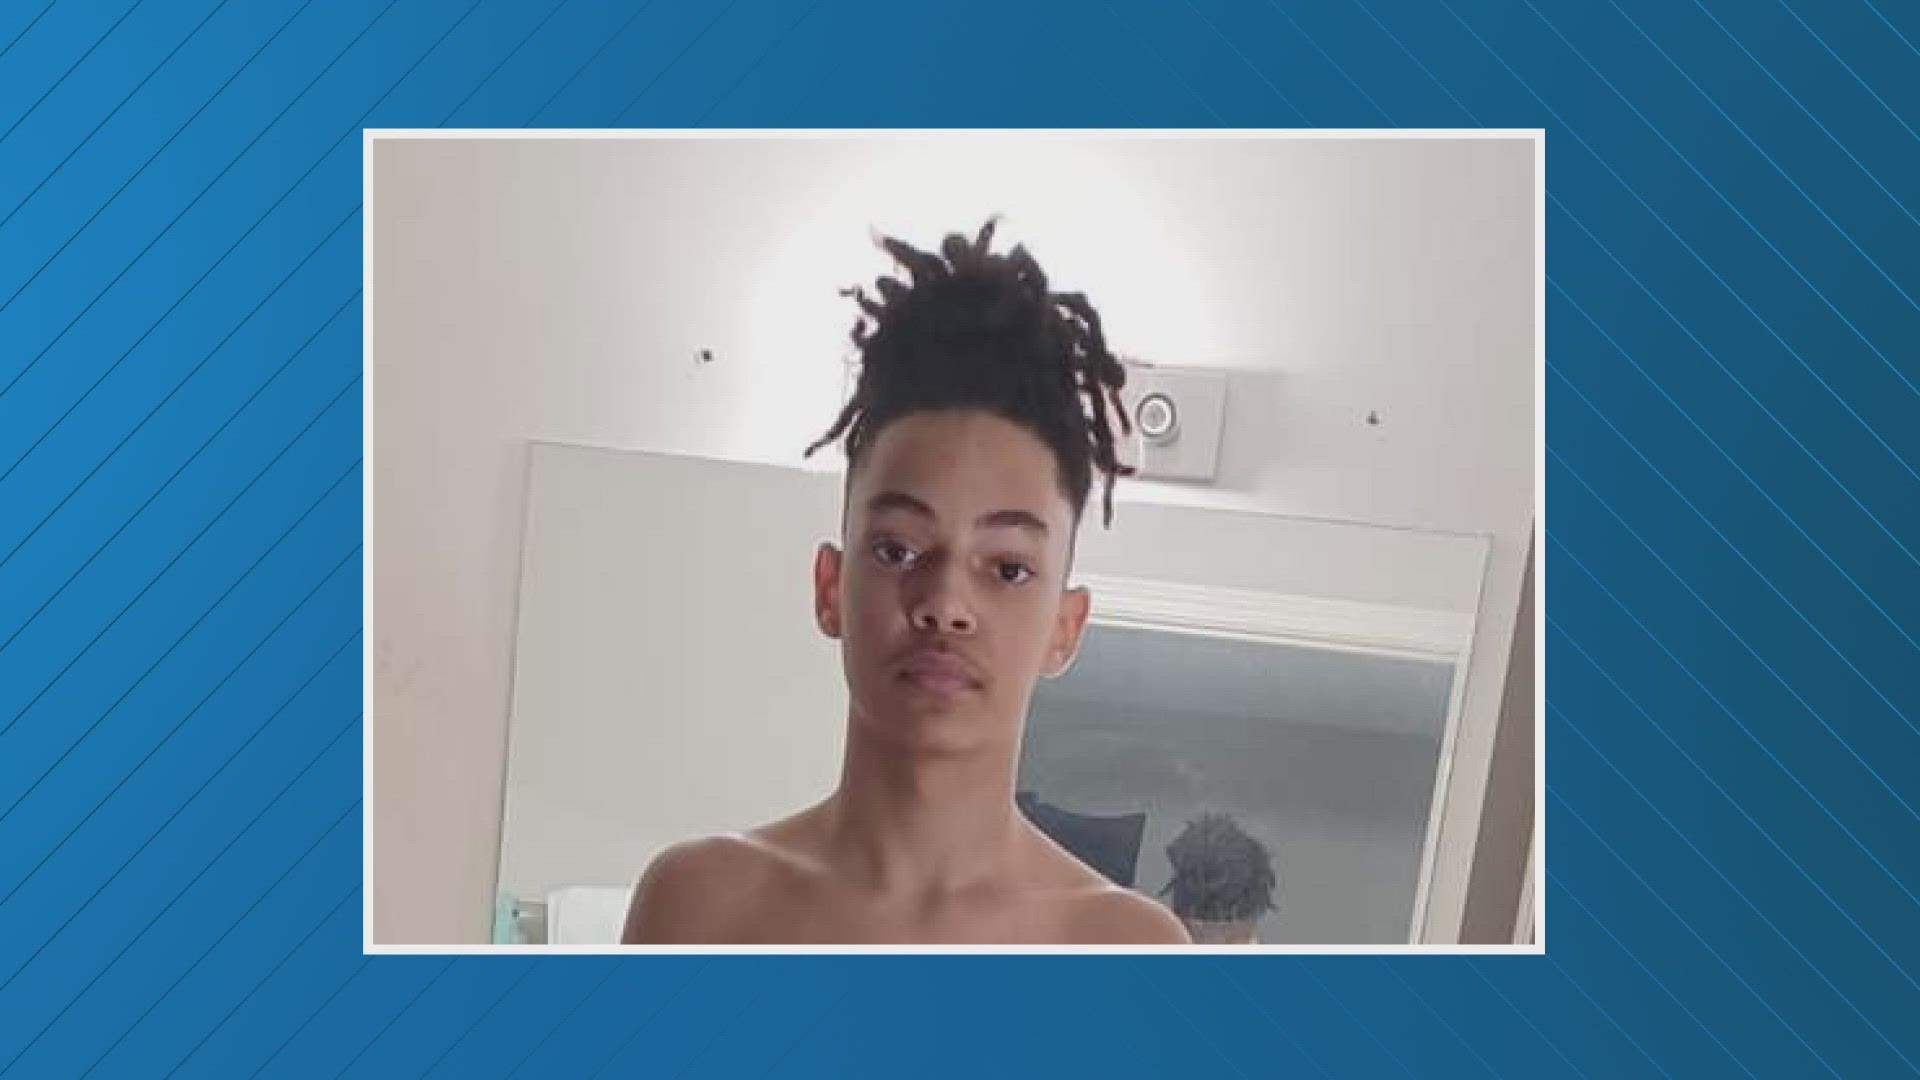 Crews searched for a missing 14-year-old swimmer for hours at Fernandina Beach Wednesday. 24 hours later, the body of Daymeyun Ellis was pulled from the surf.